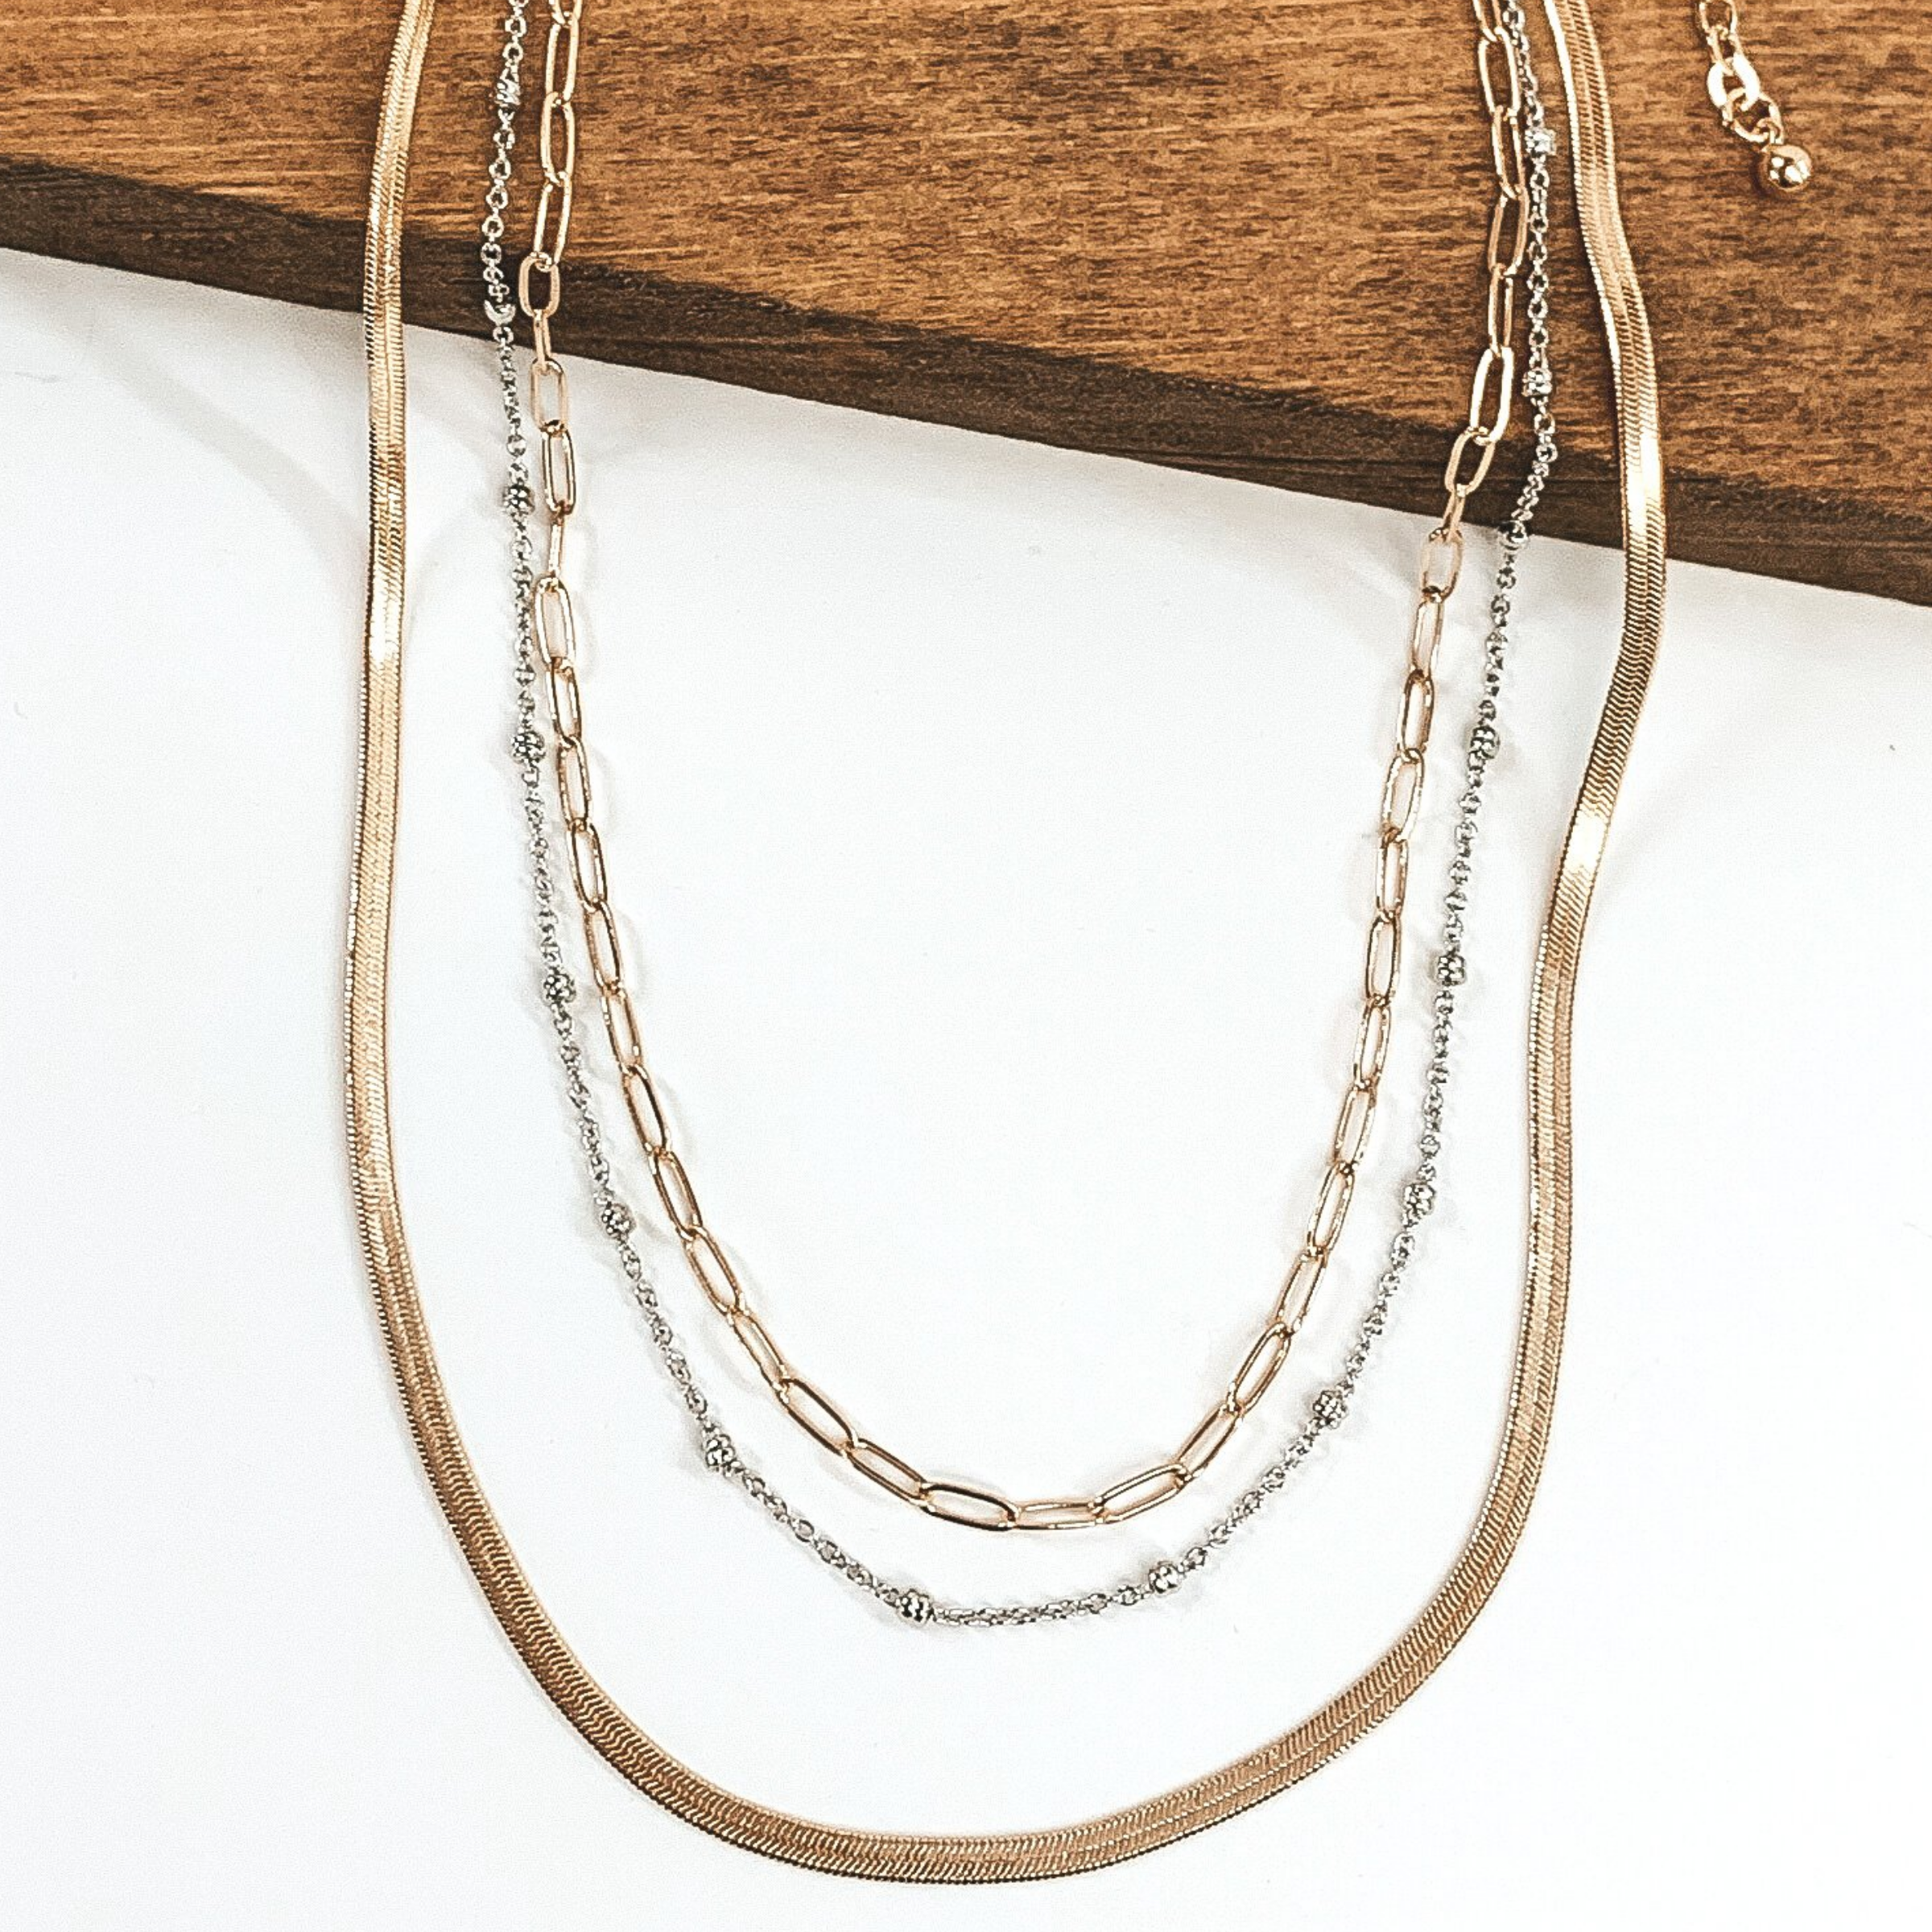 This gold necklace has three different chains. The first one is a classic thin link chain strand in gold, the next one has tiny silver bead spacers on a silver chain, and the last one is a flat herringbone chain. This necklace is pictured on a white background while partially laying on a dark piece of wood.  